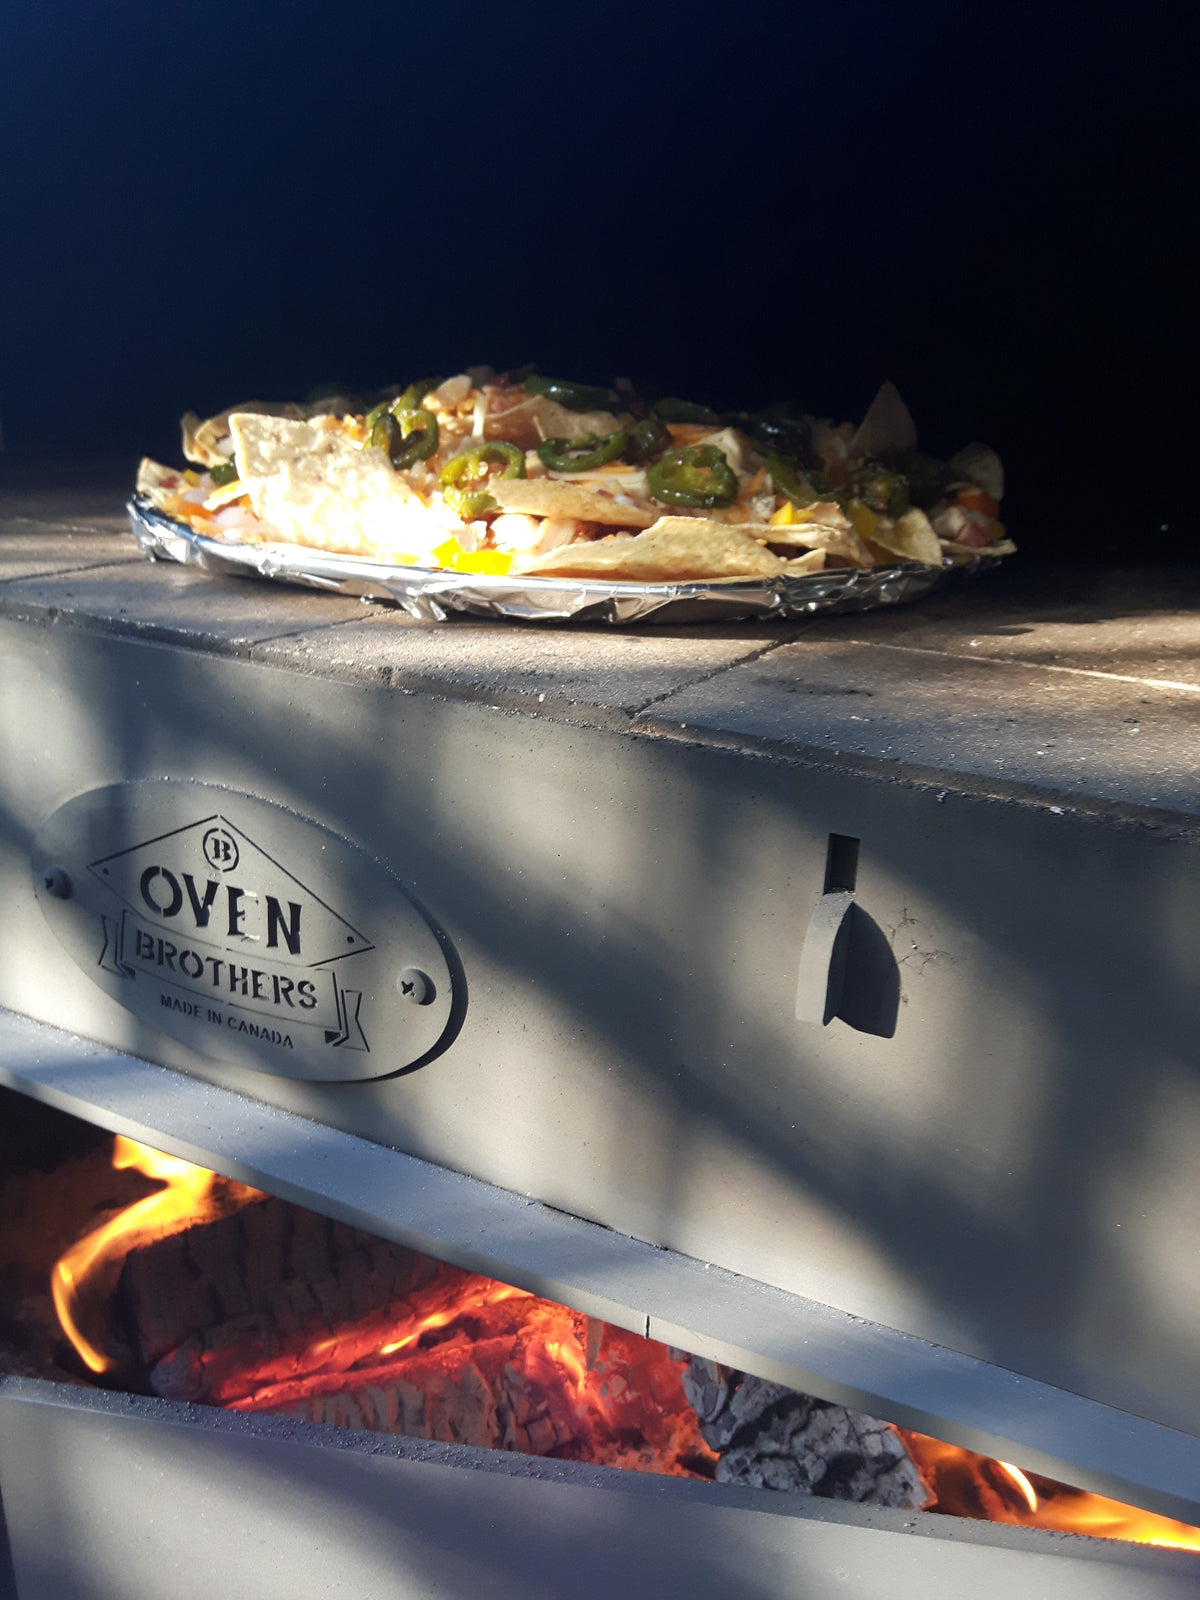 The Big Bro™ Outdoor Wood Fired Pizza Oven Kit